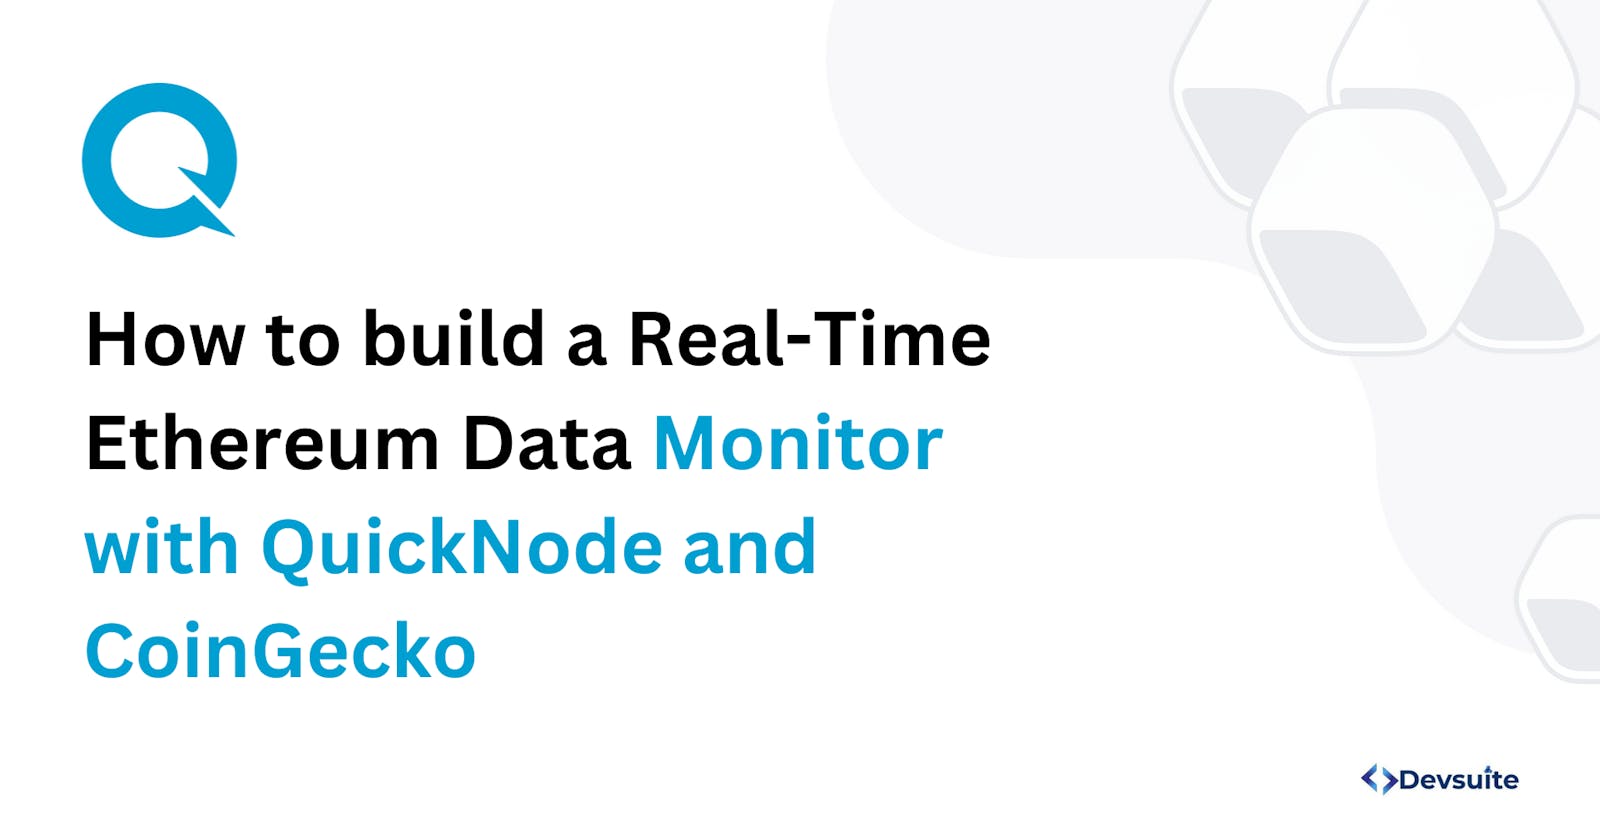 How to Build a Real-Time Ethereum Data Monitor with QuickNode and CoinGecko